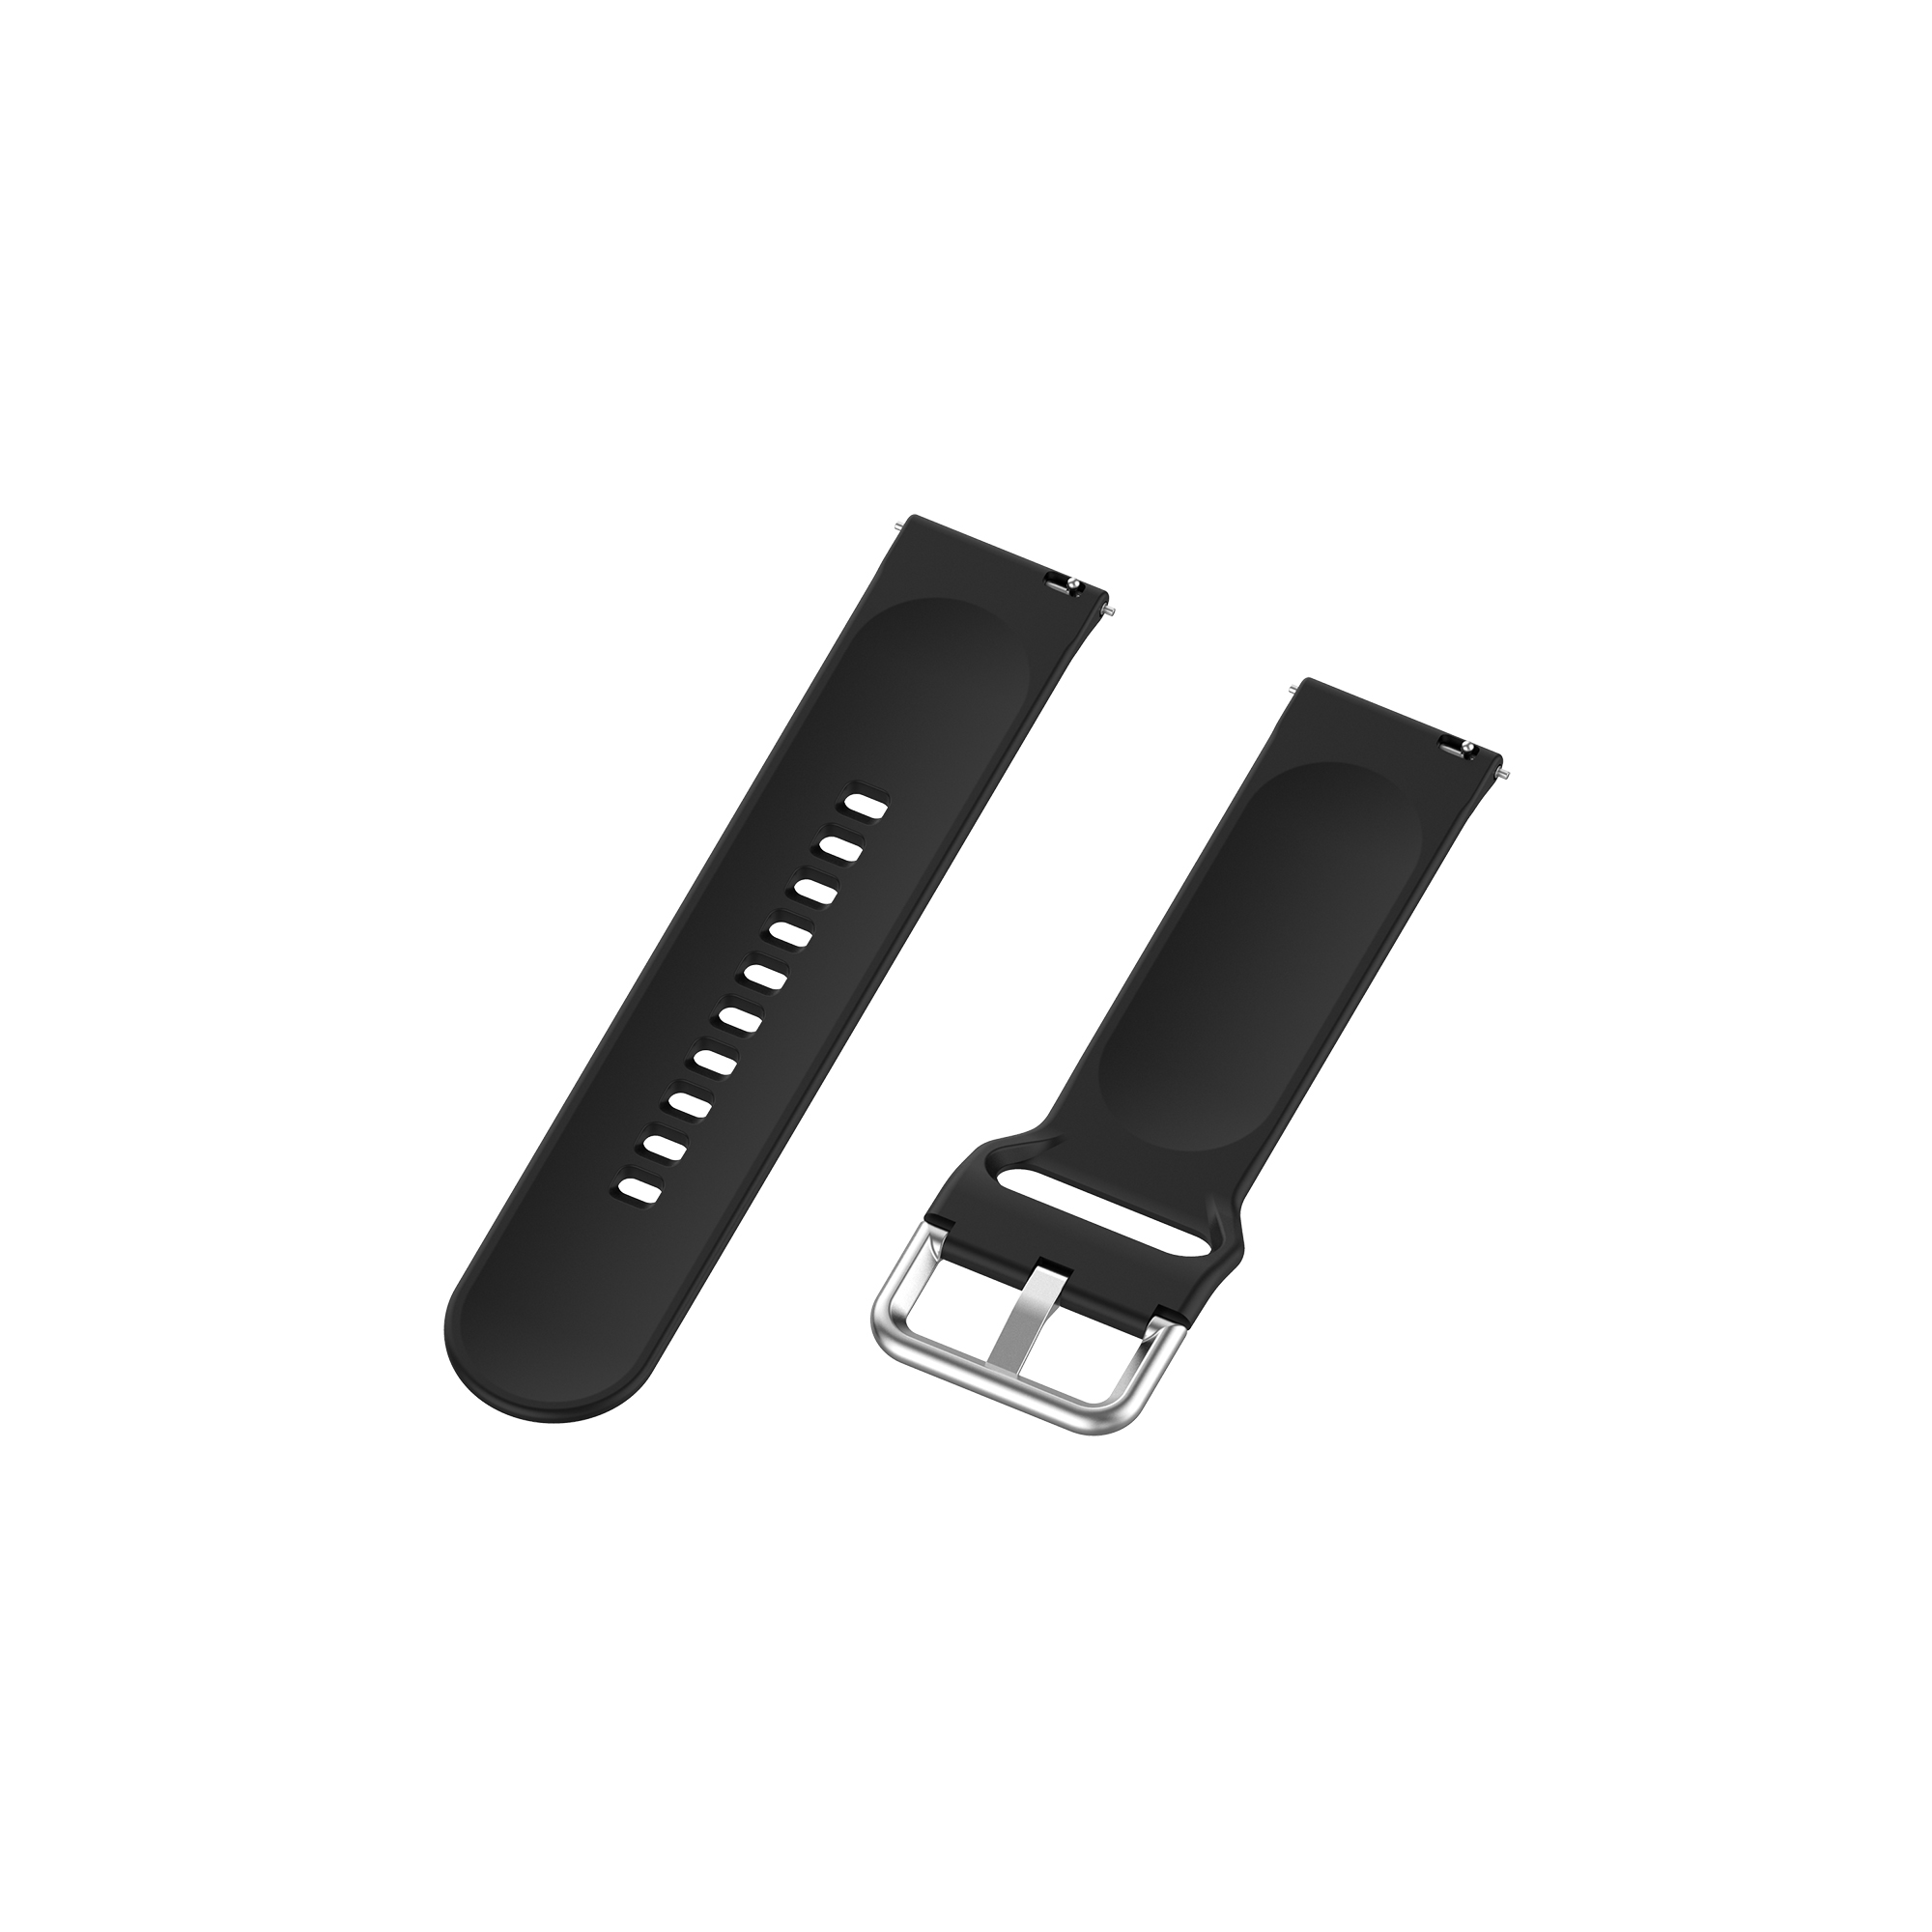 Bakeey-22mm-Multi-color-Silicone-Siver-Buckle-Replacement-Strap-Smart-Watch-Band-For-Huawei-Watch-GT-1768637-16